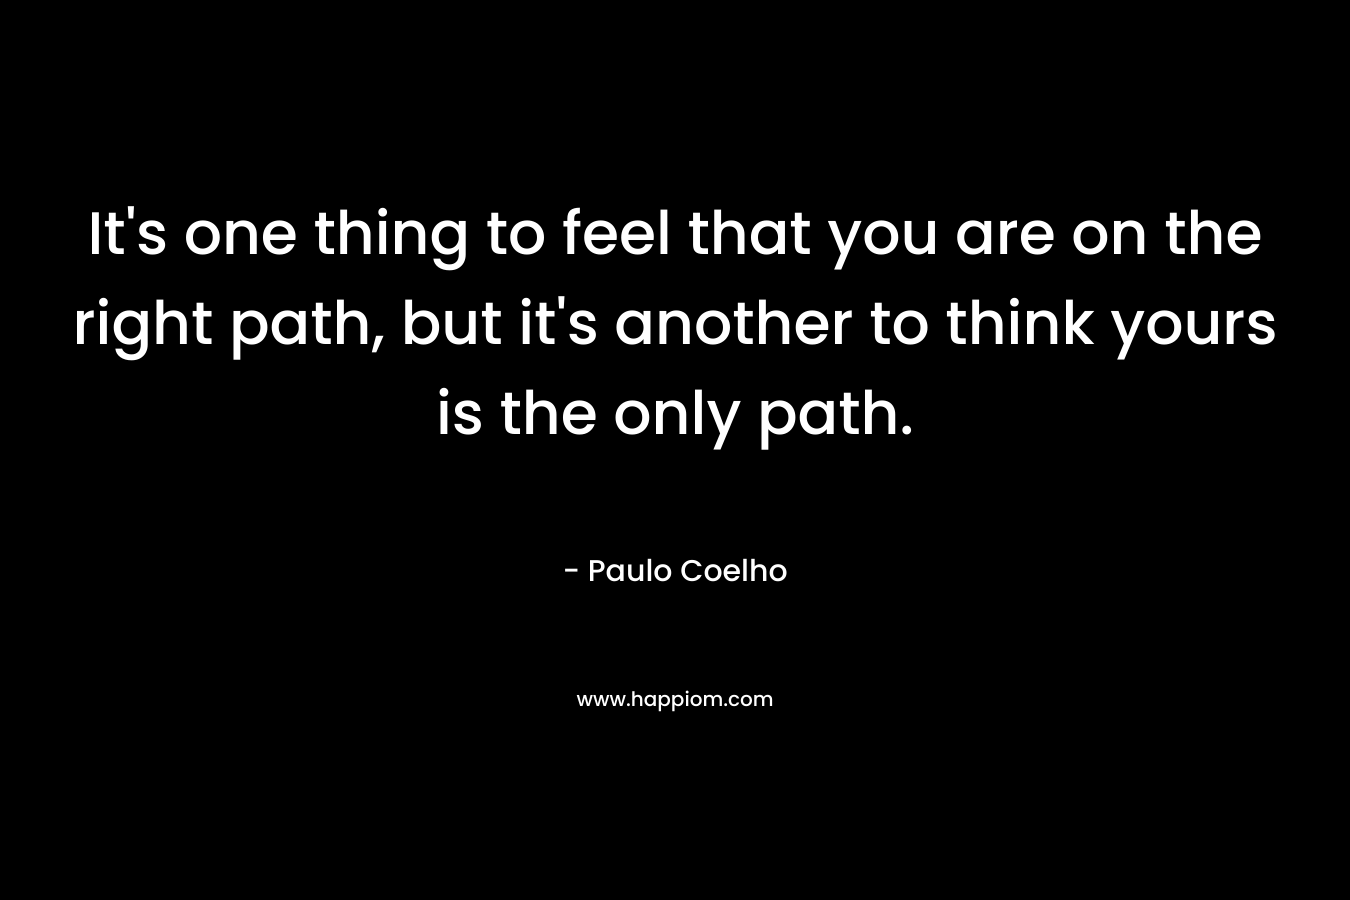 It's one thing to feel that you are on the right path, but it's another to think yours is the only path.